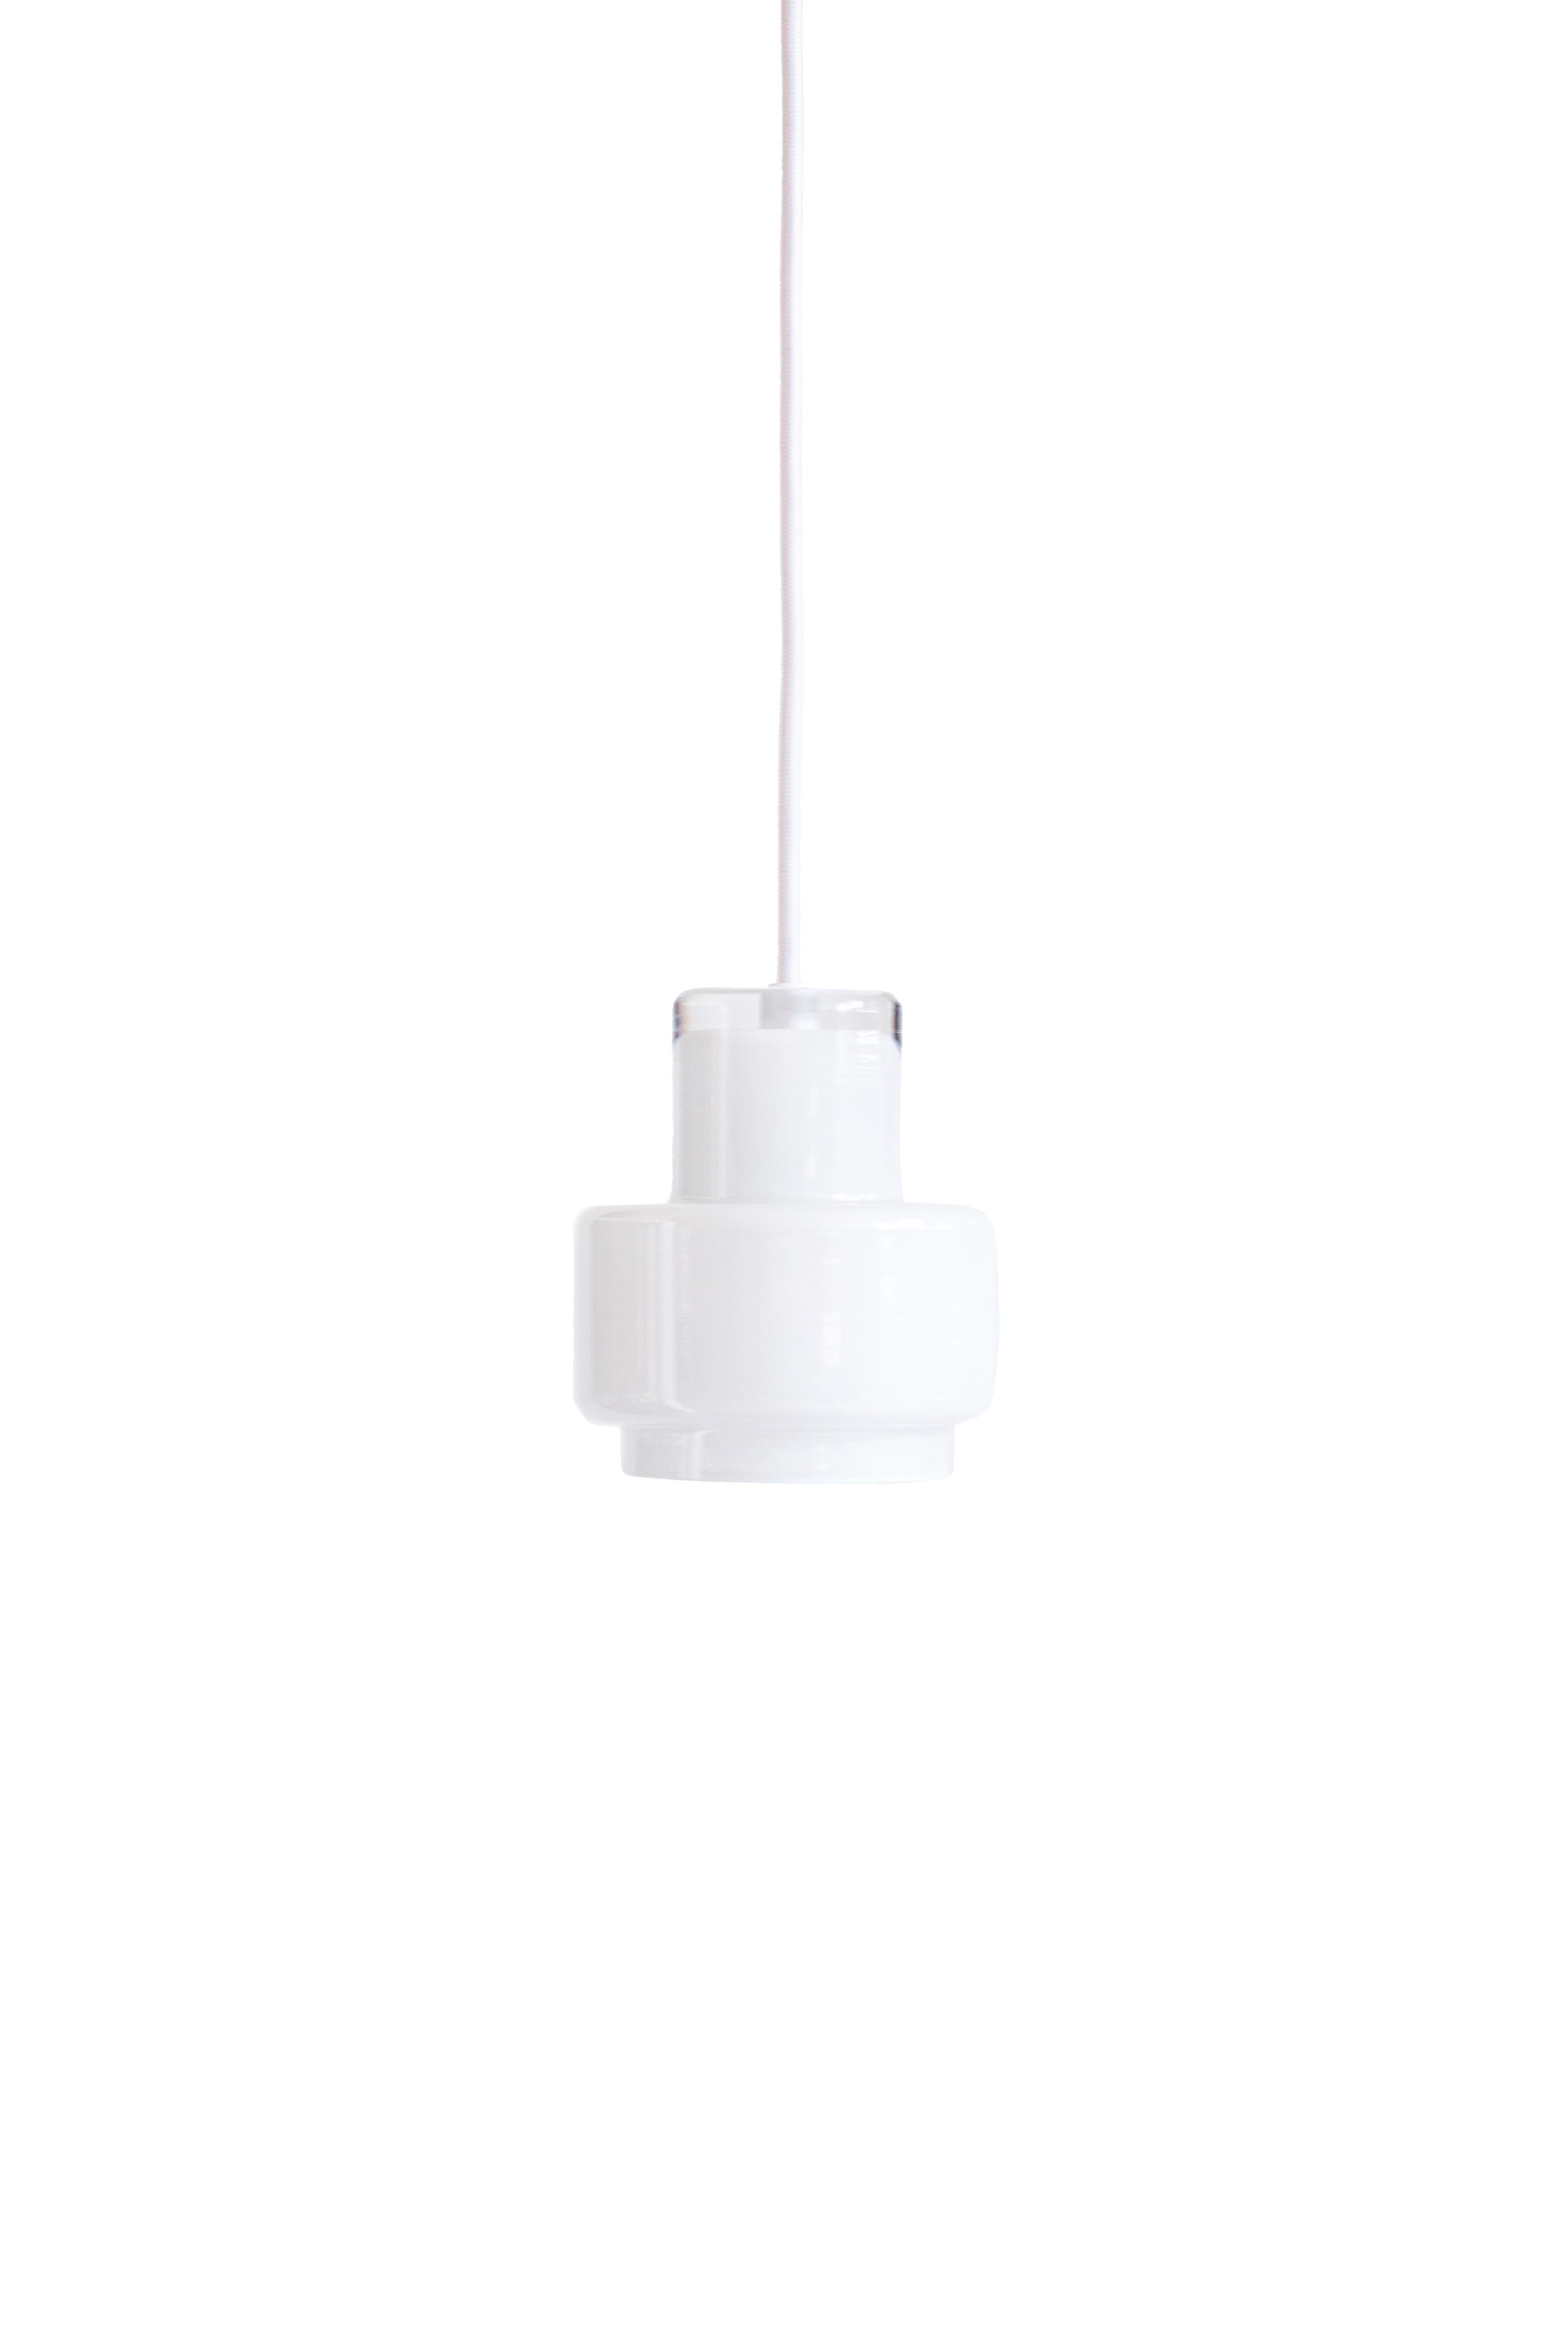 'Multi M' Glass Pendant in White by Jokinen and Konu for Innolux For Sale 6